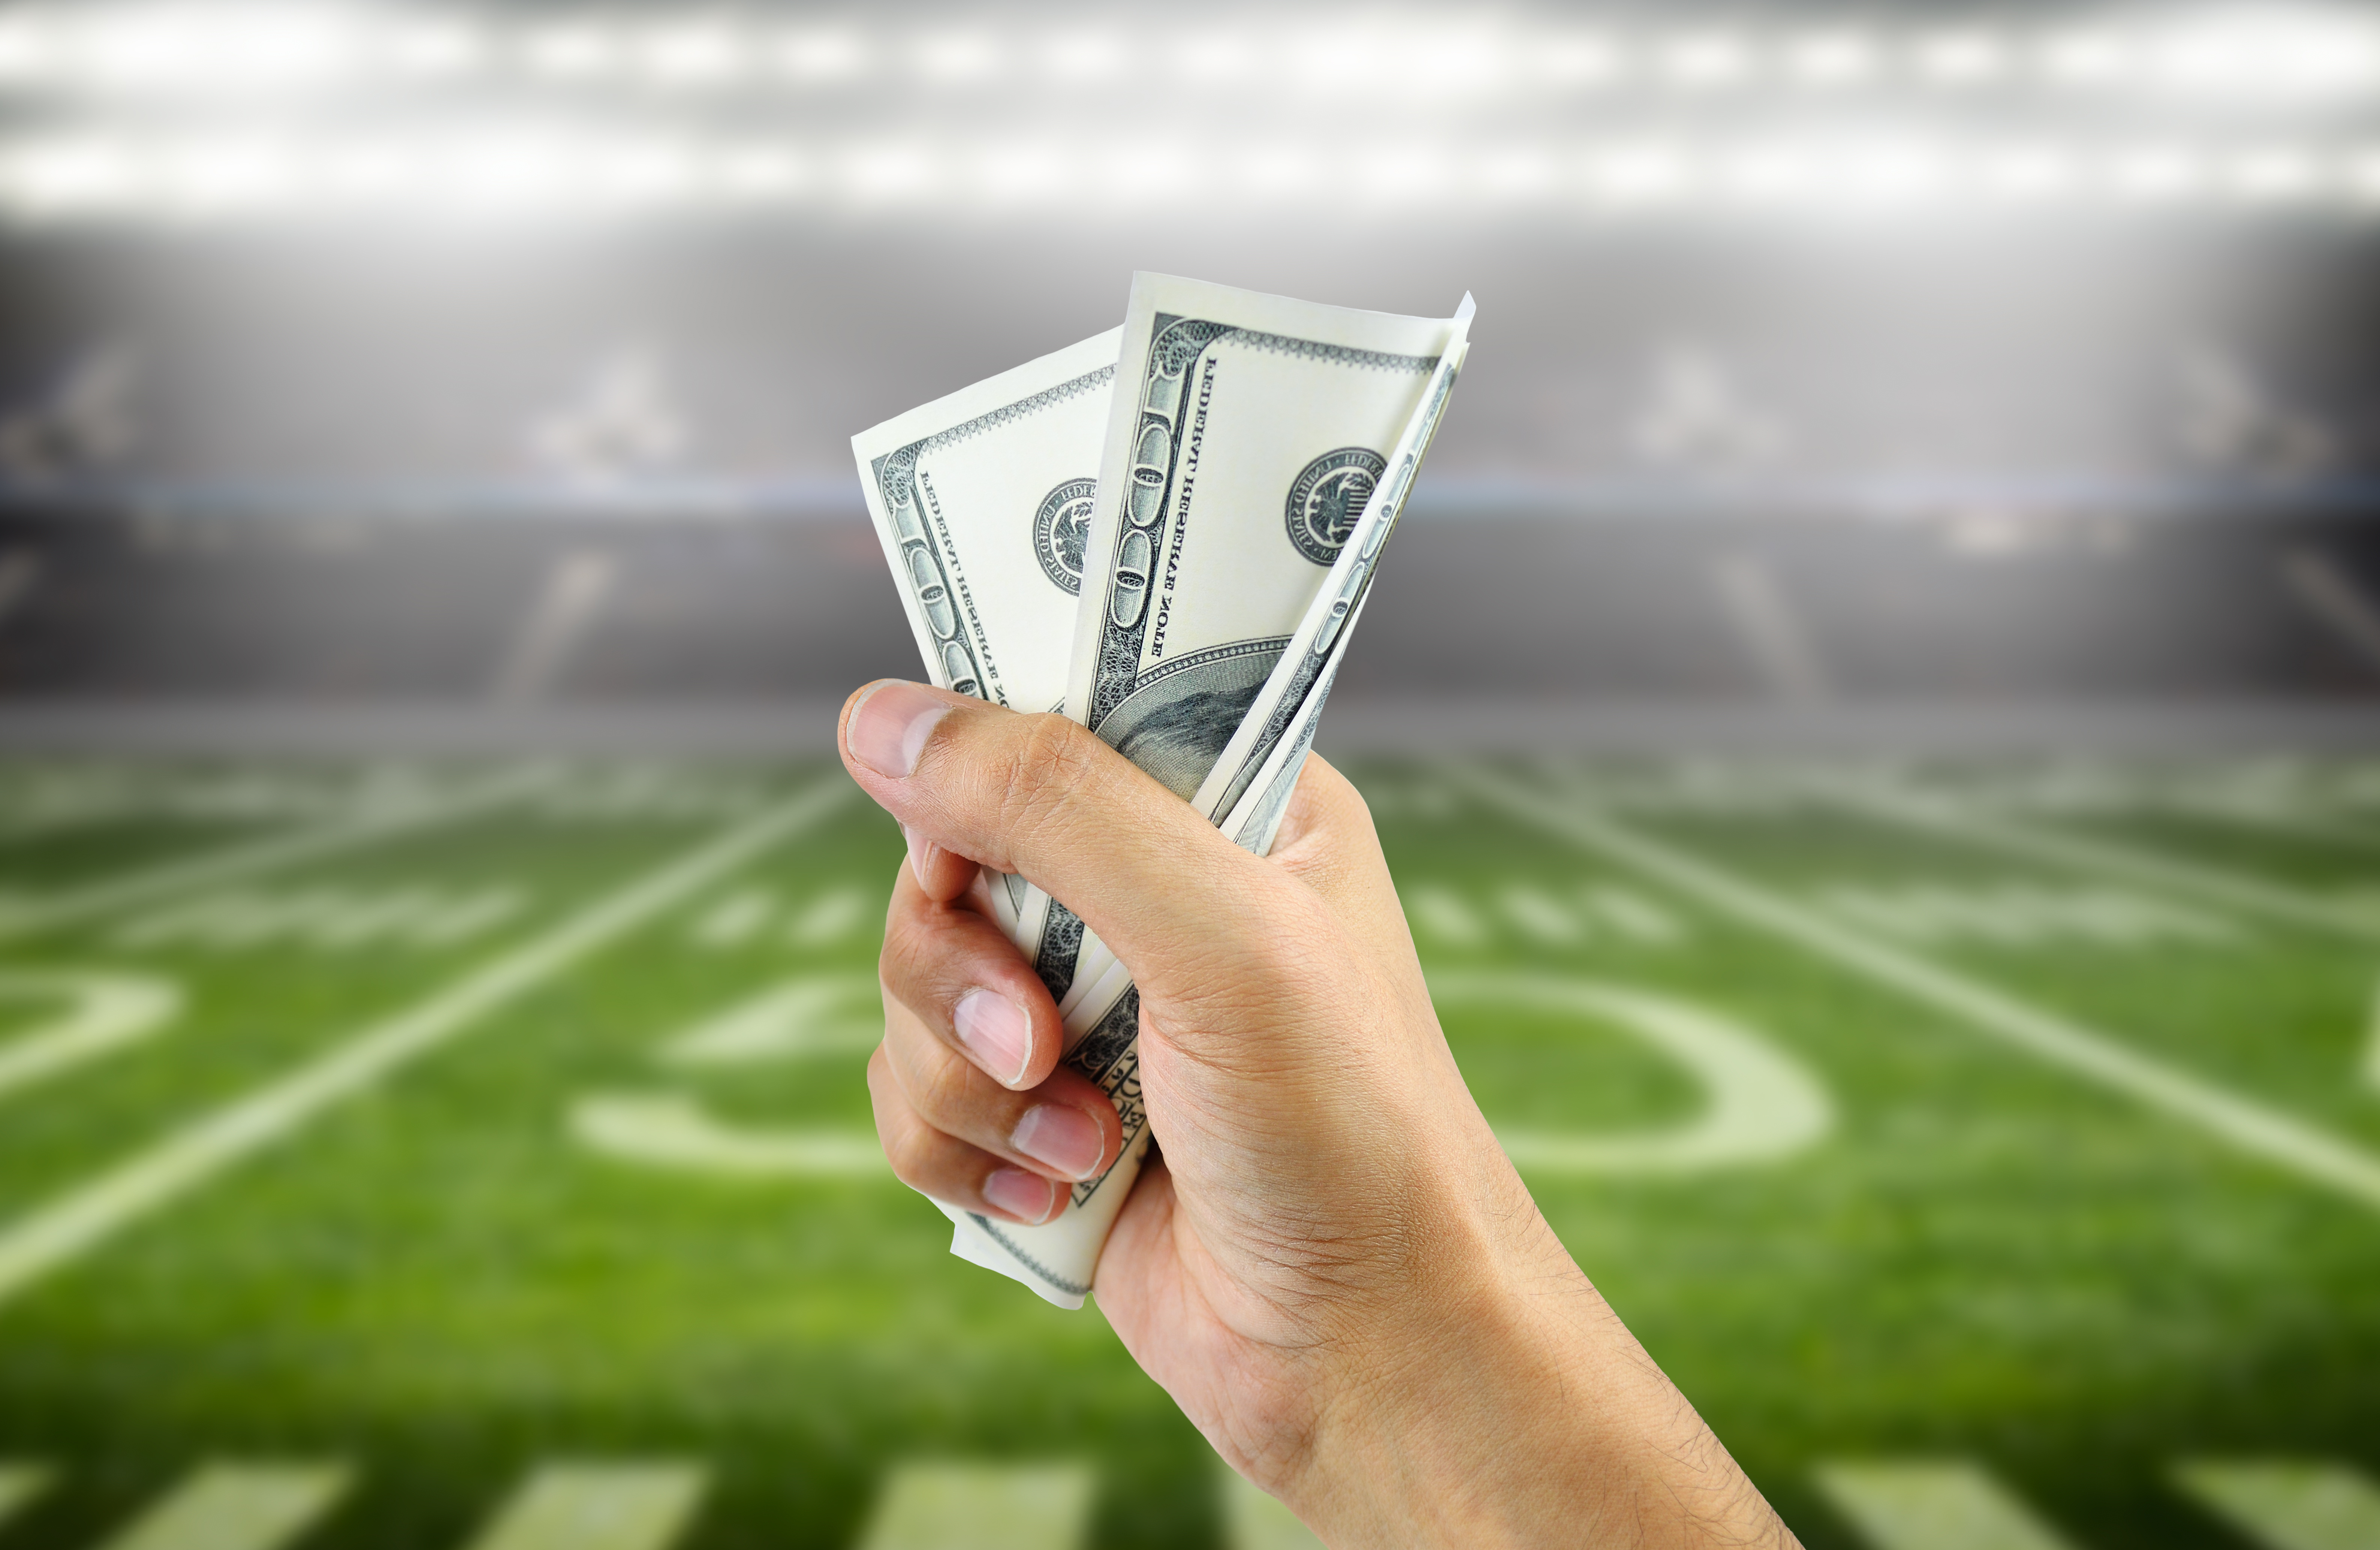 Close-up of hand holding money in sports stadium